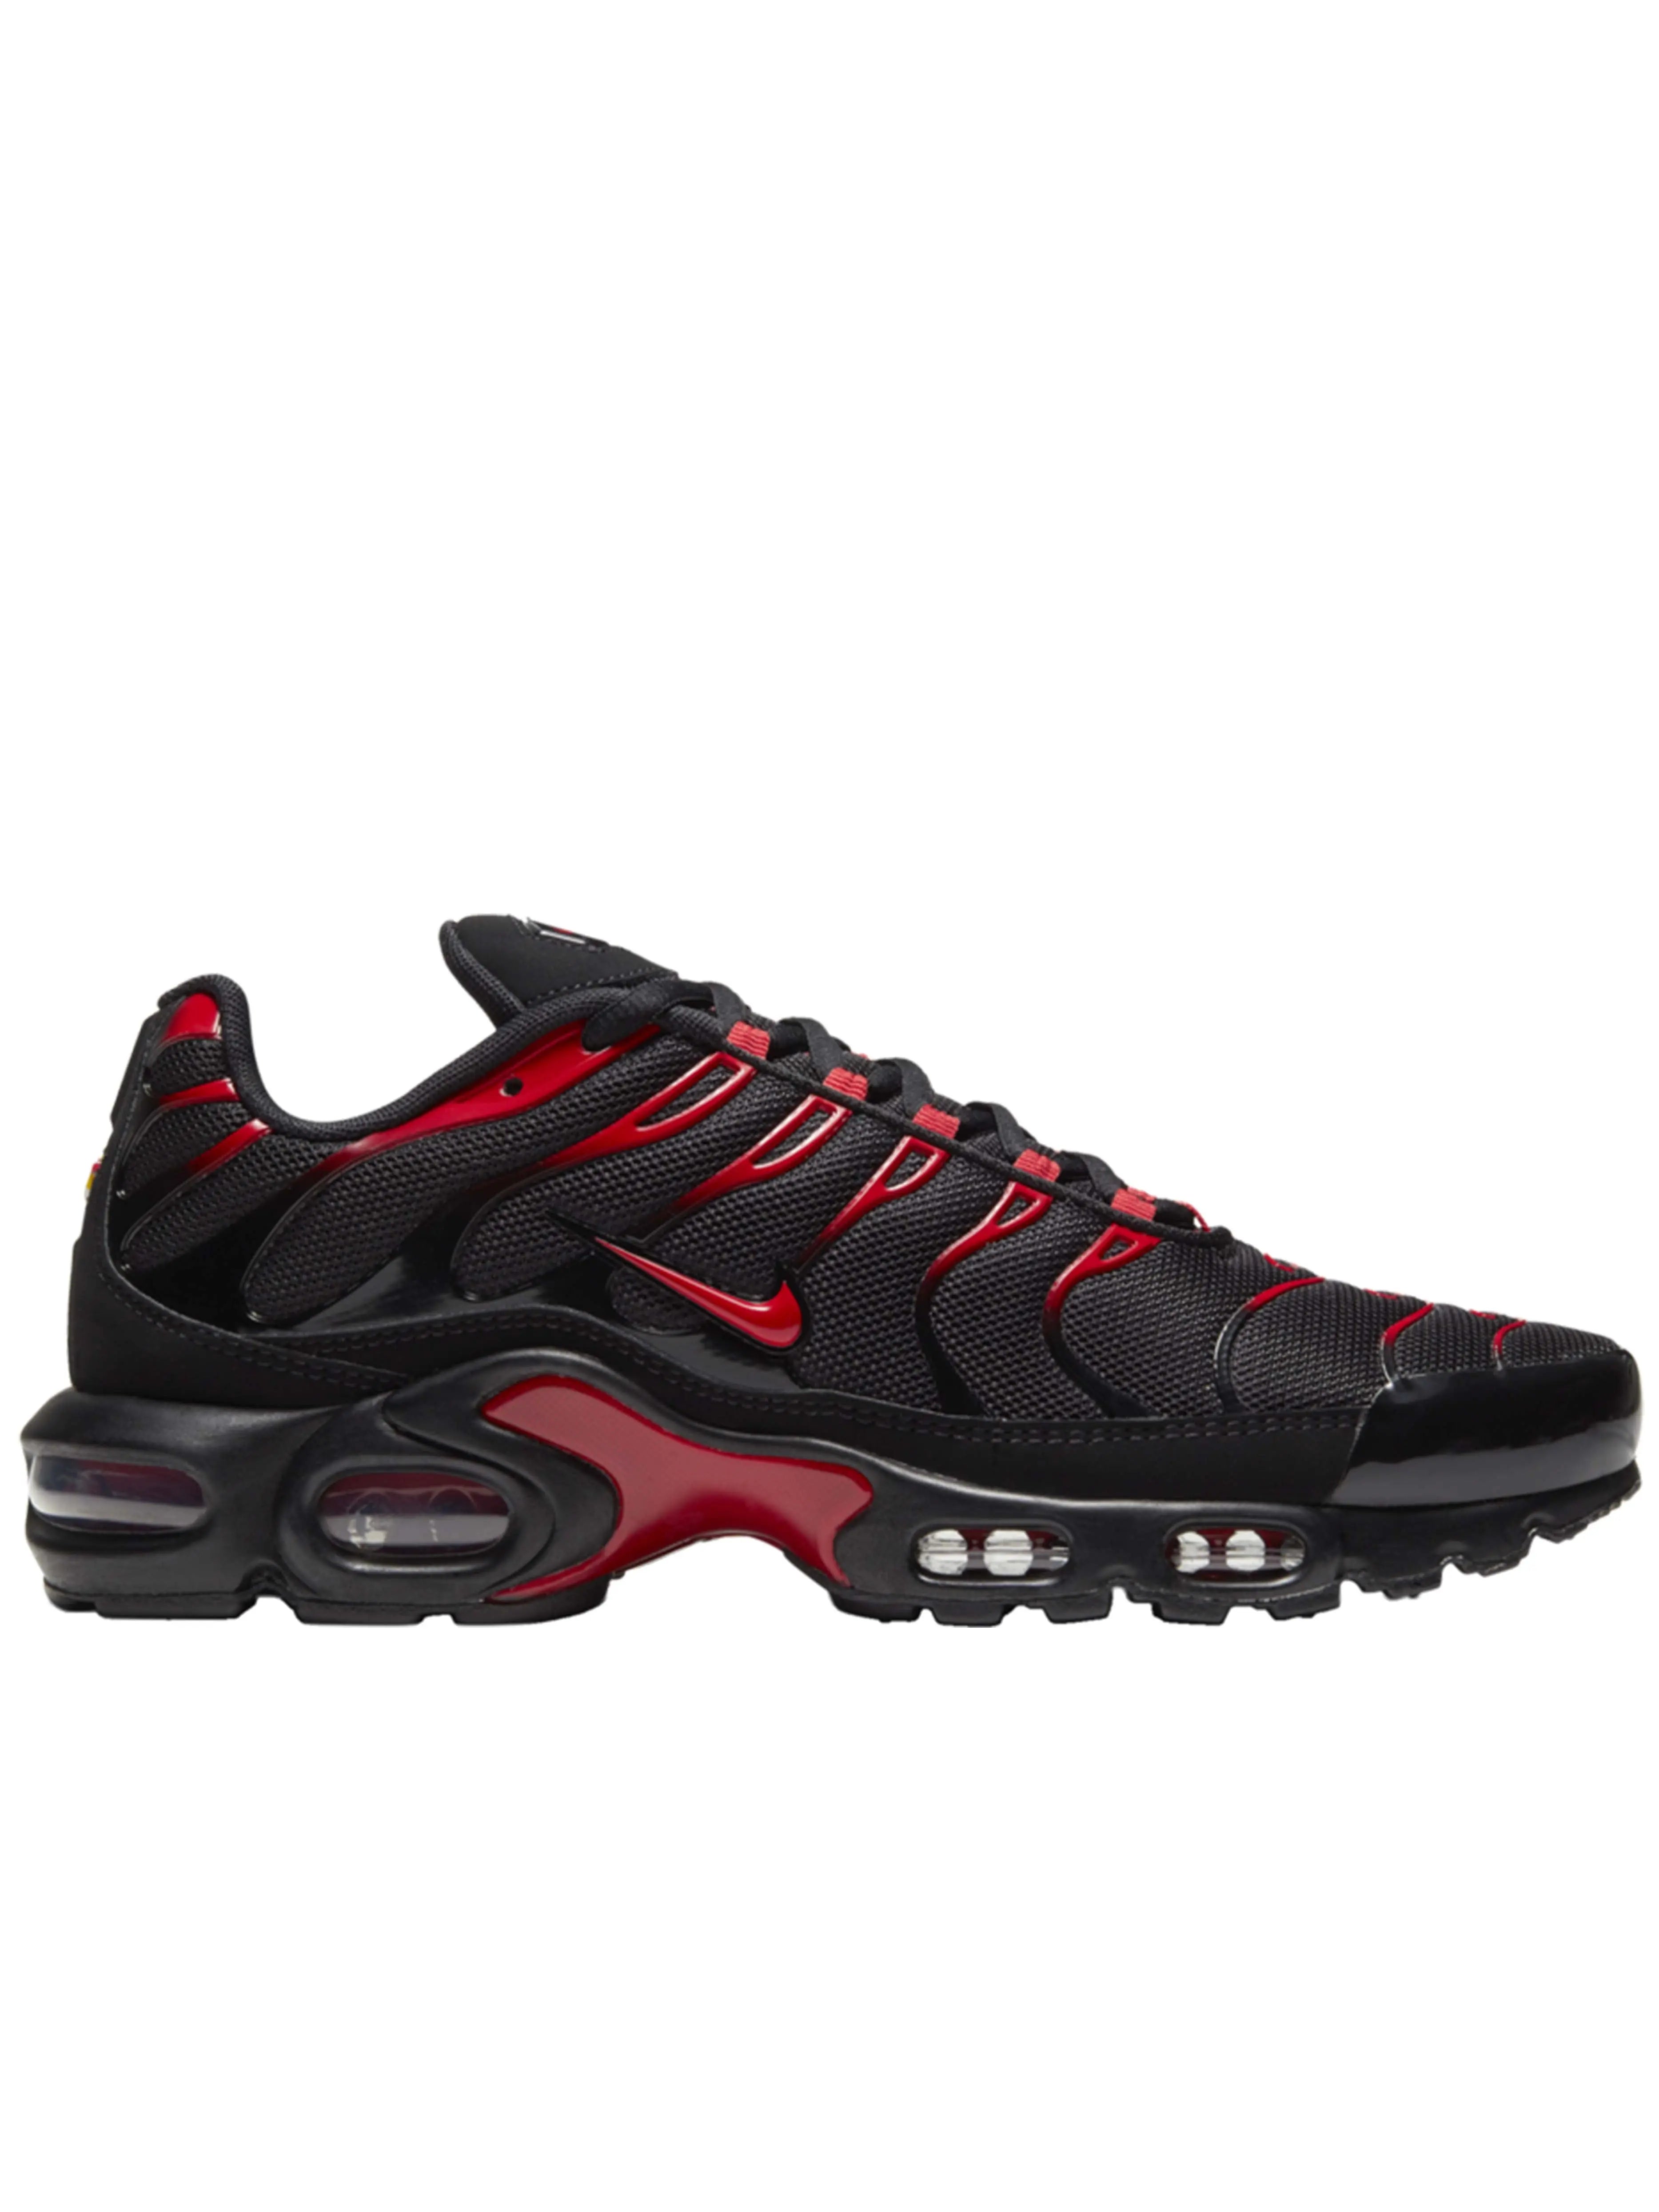 Buy Nike Air Max Plus Tn 'Bred' Online in Auckland, New Zealand - – Prior